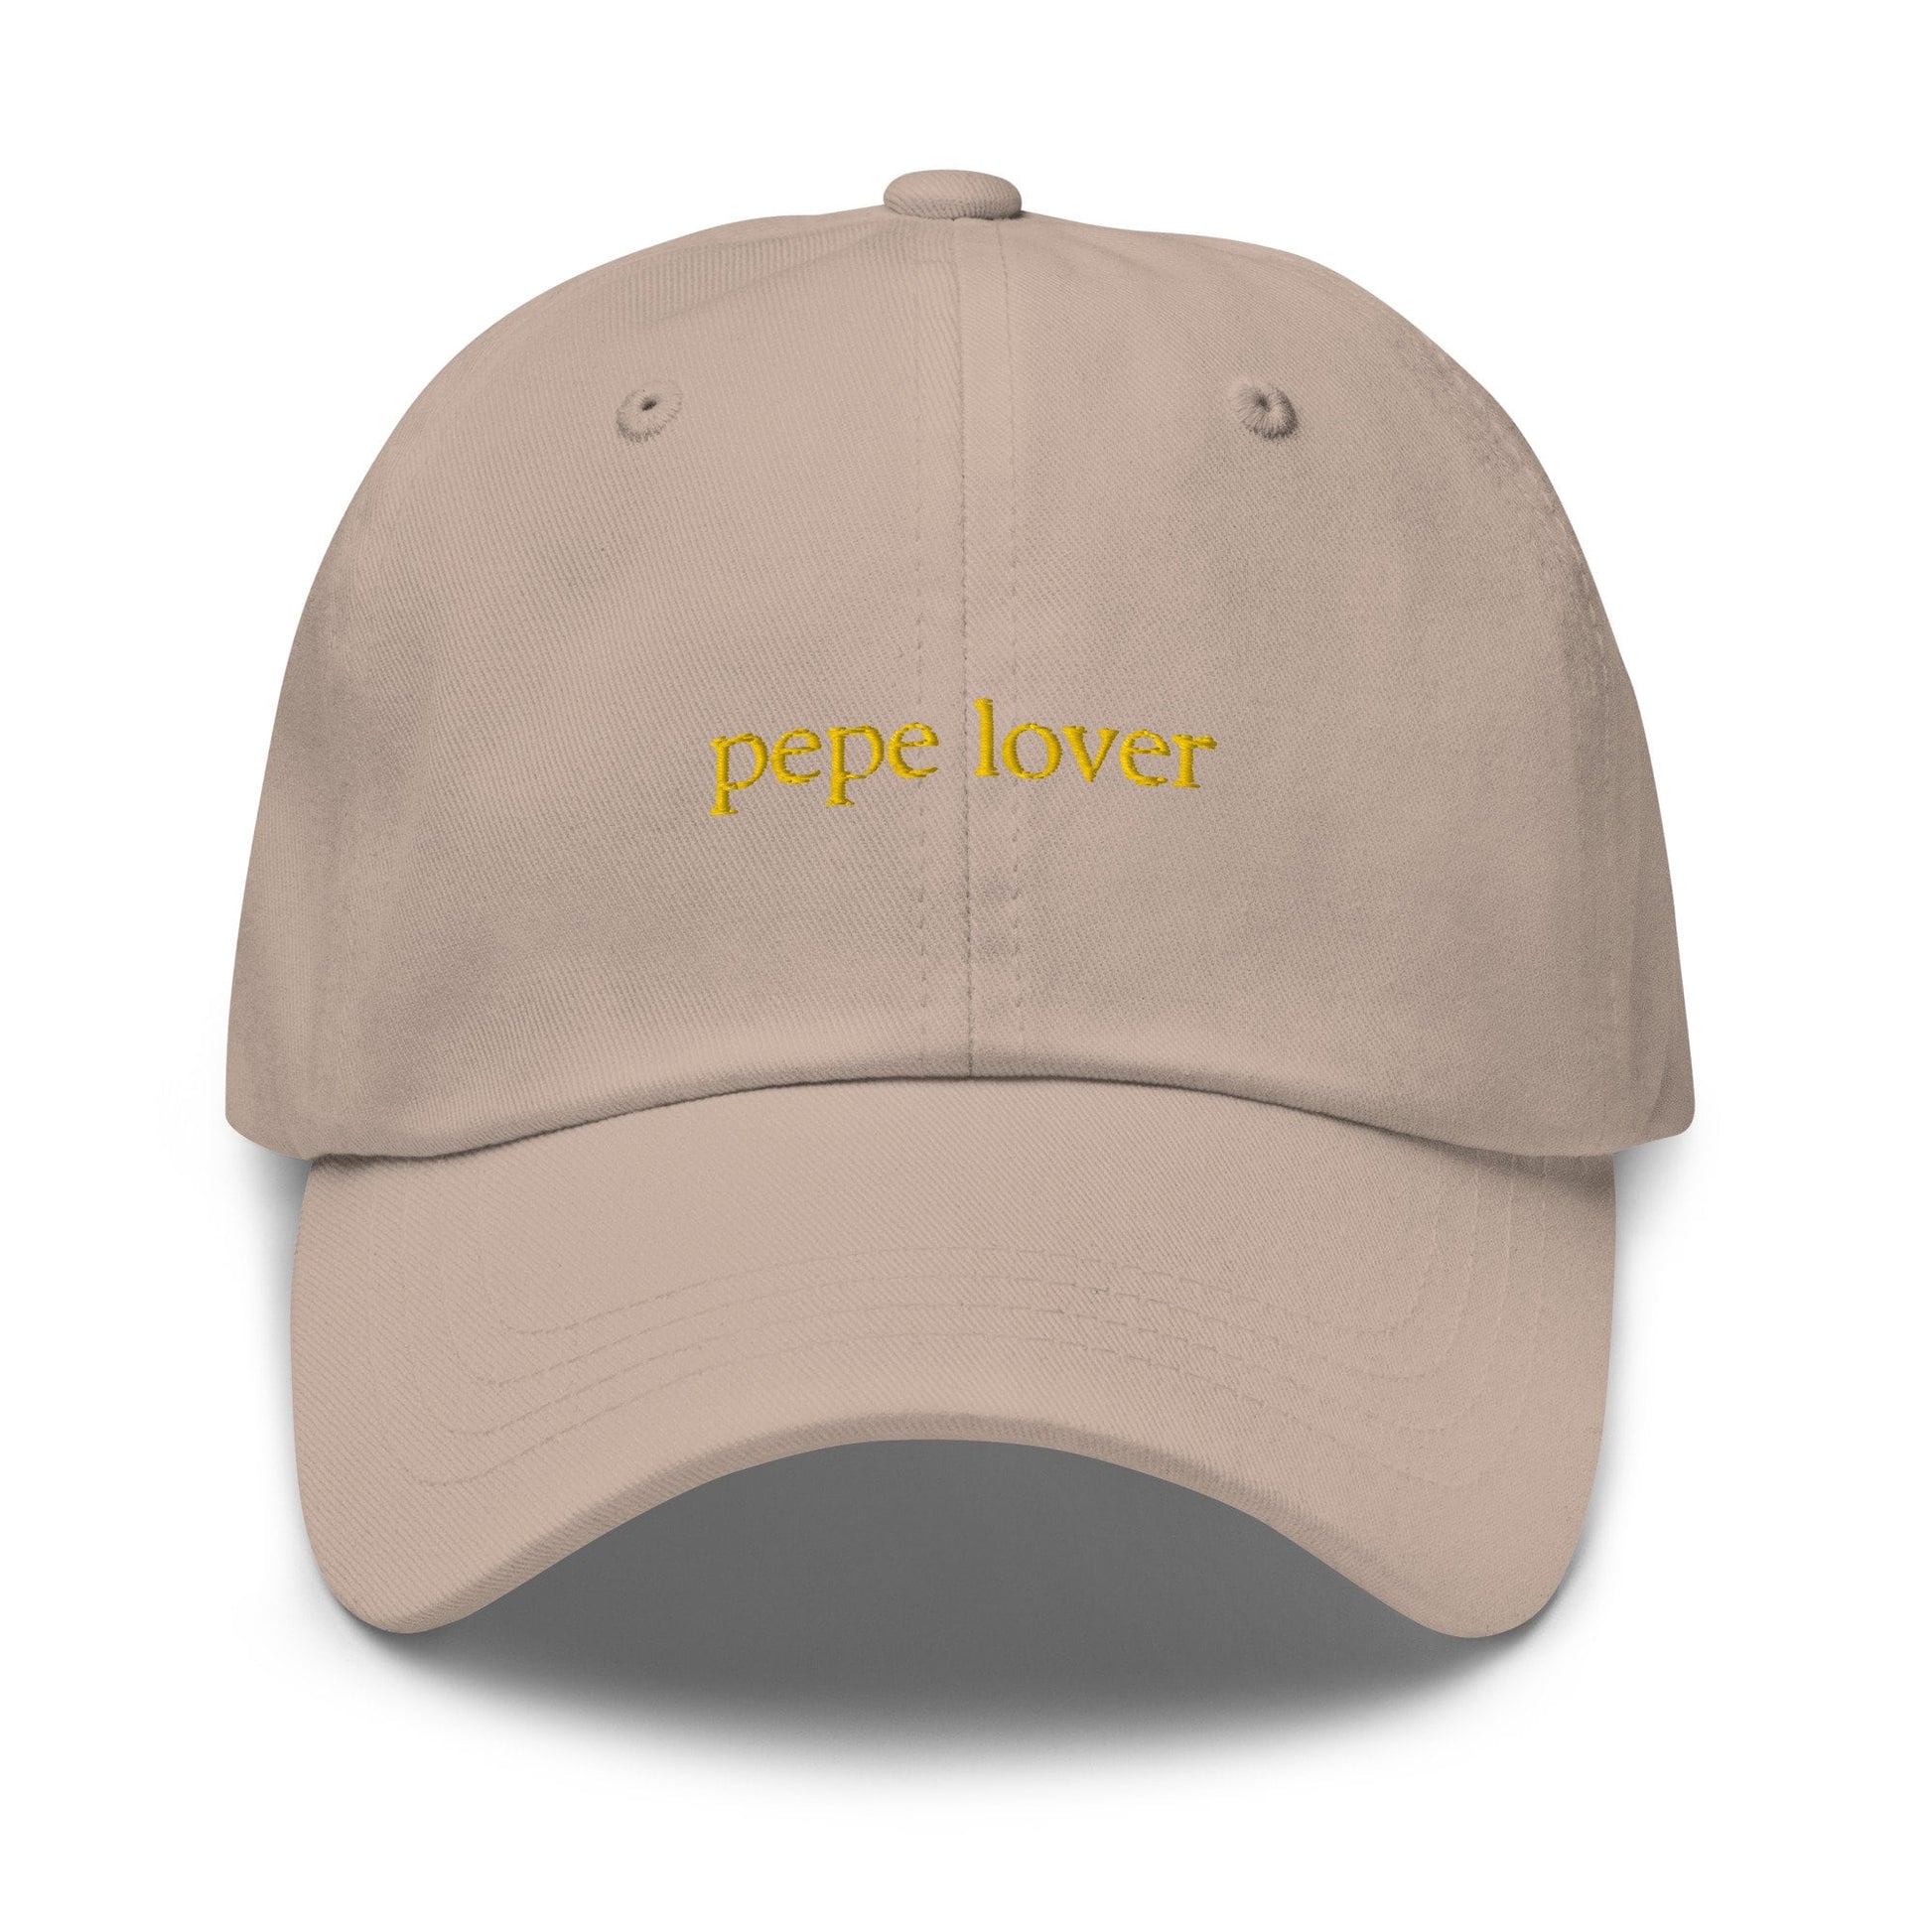 Cacio Pepe Dad Hat - Gift for Italian pepper (and cheese) pasta lovers - Cotton embroidered Cap